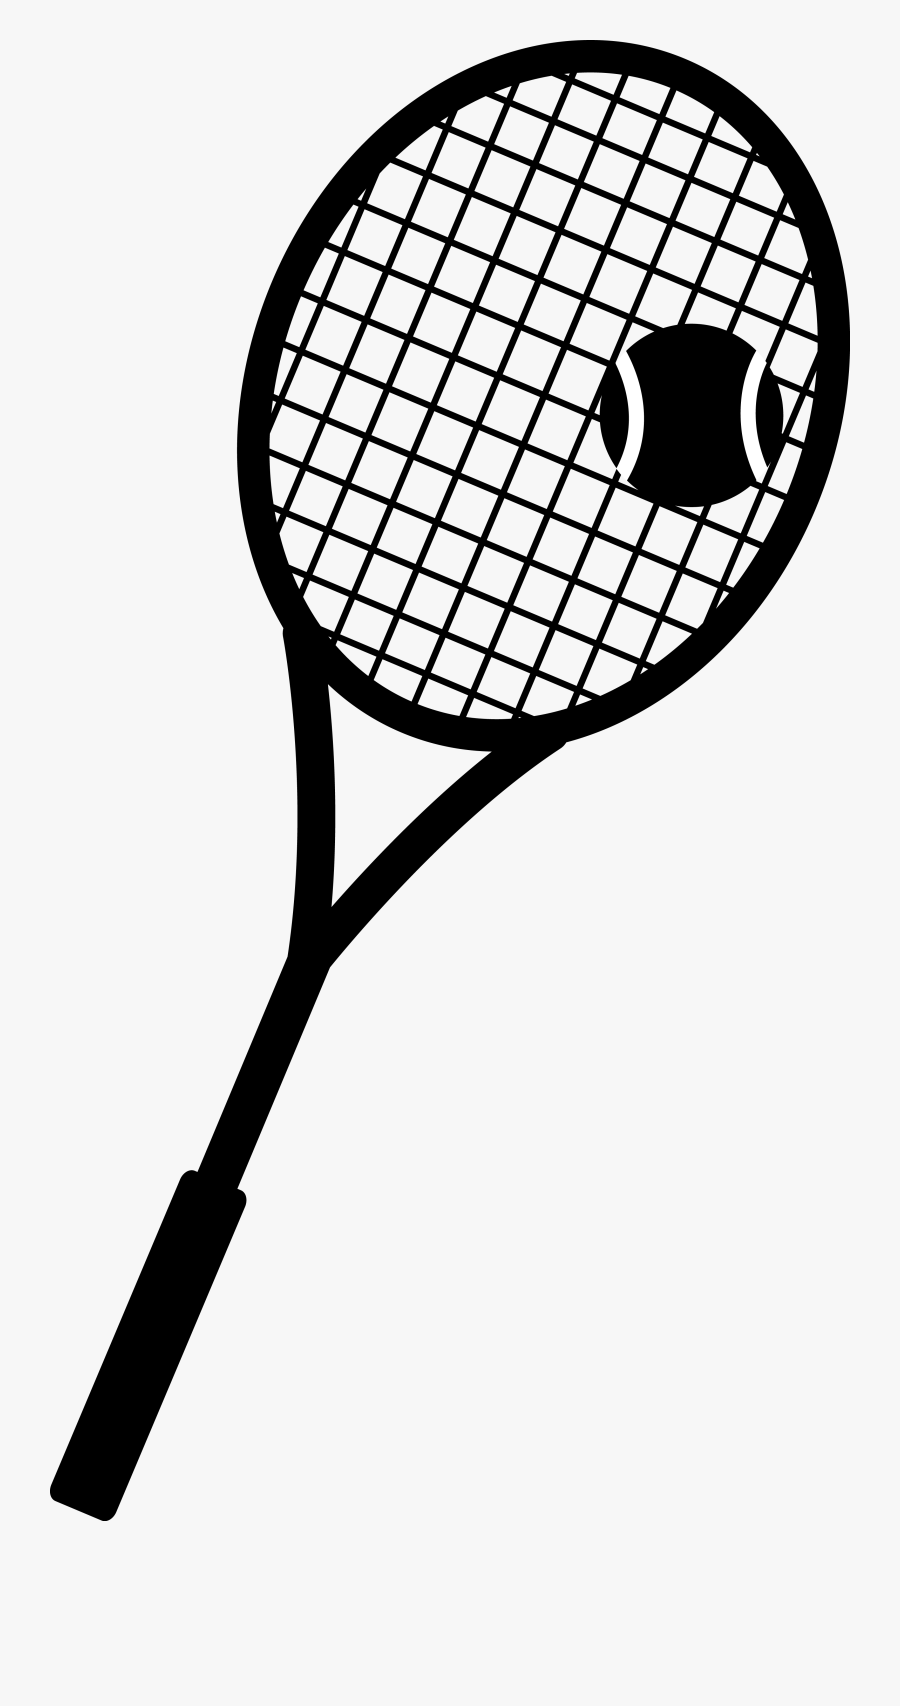 Tennis Clipart Black And White - Transparent Background Badminton Racket Clipart, Transparent Clipart